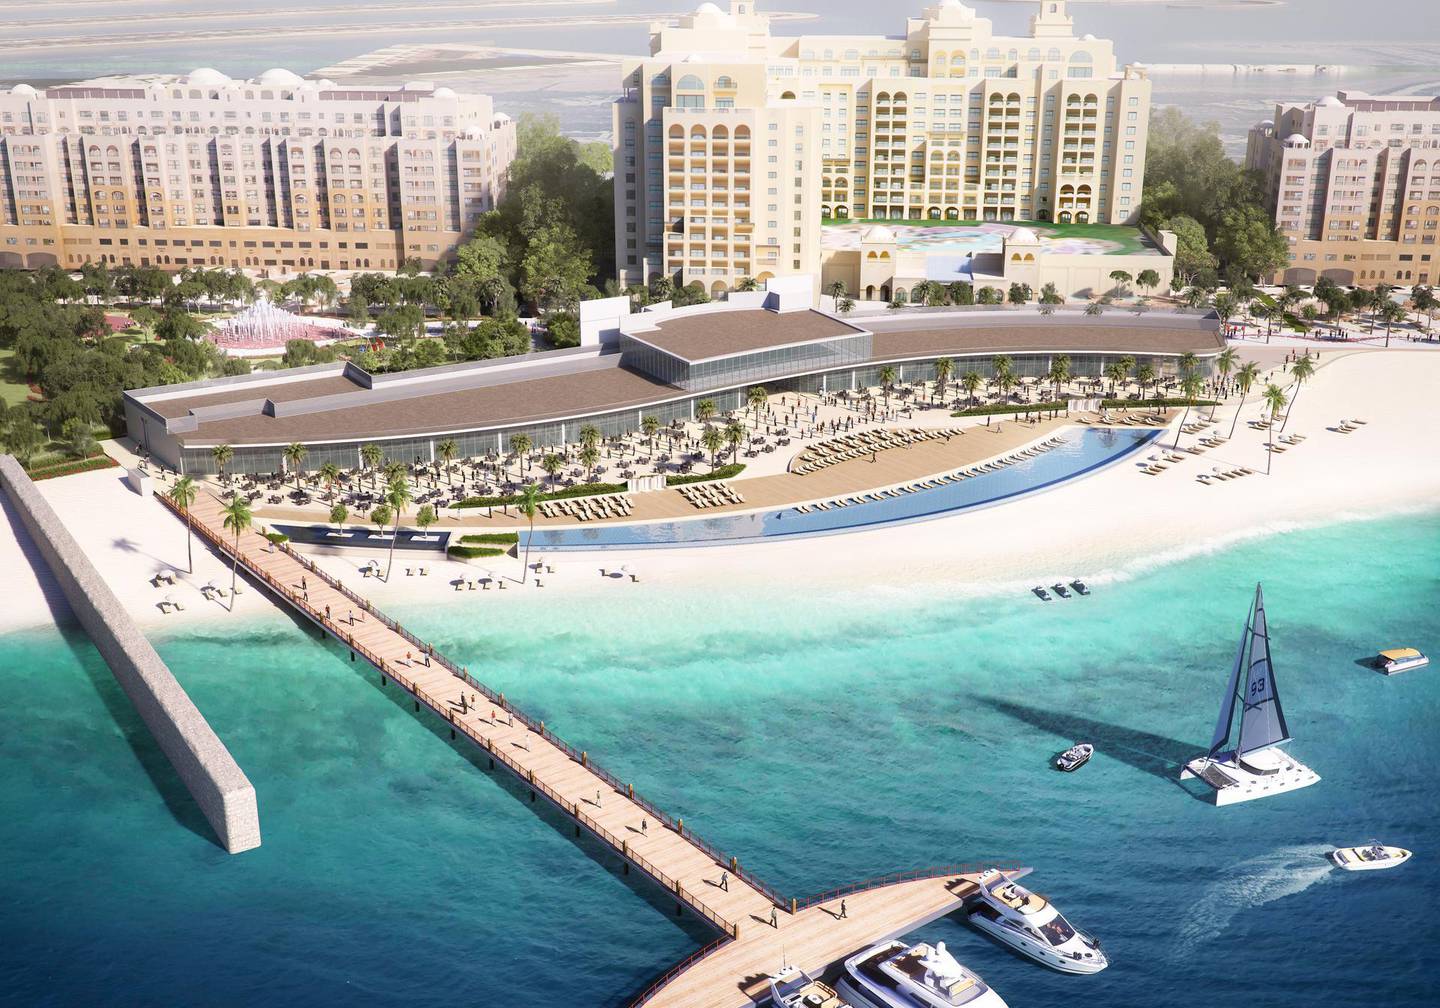 The St Regis Beach Club will be located at the new Palm West Beach complex at Palm Jumeirah. Courtesy Nakheel